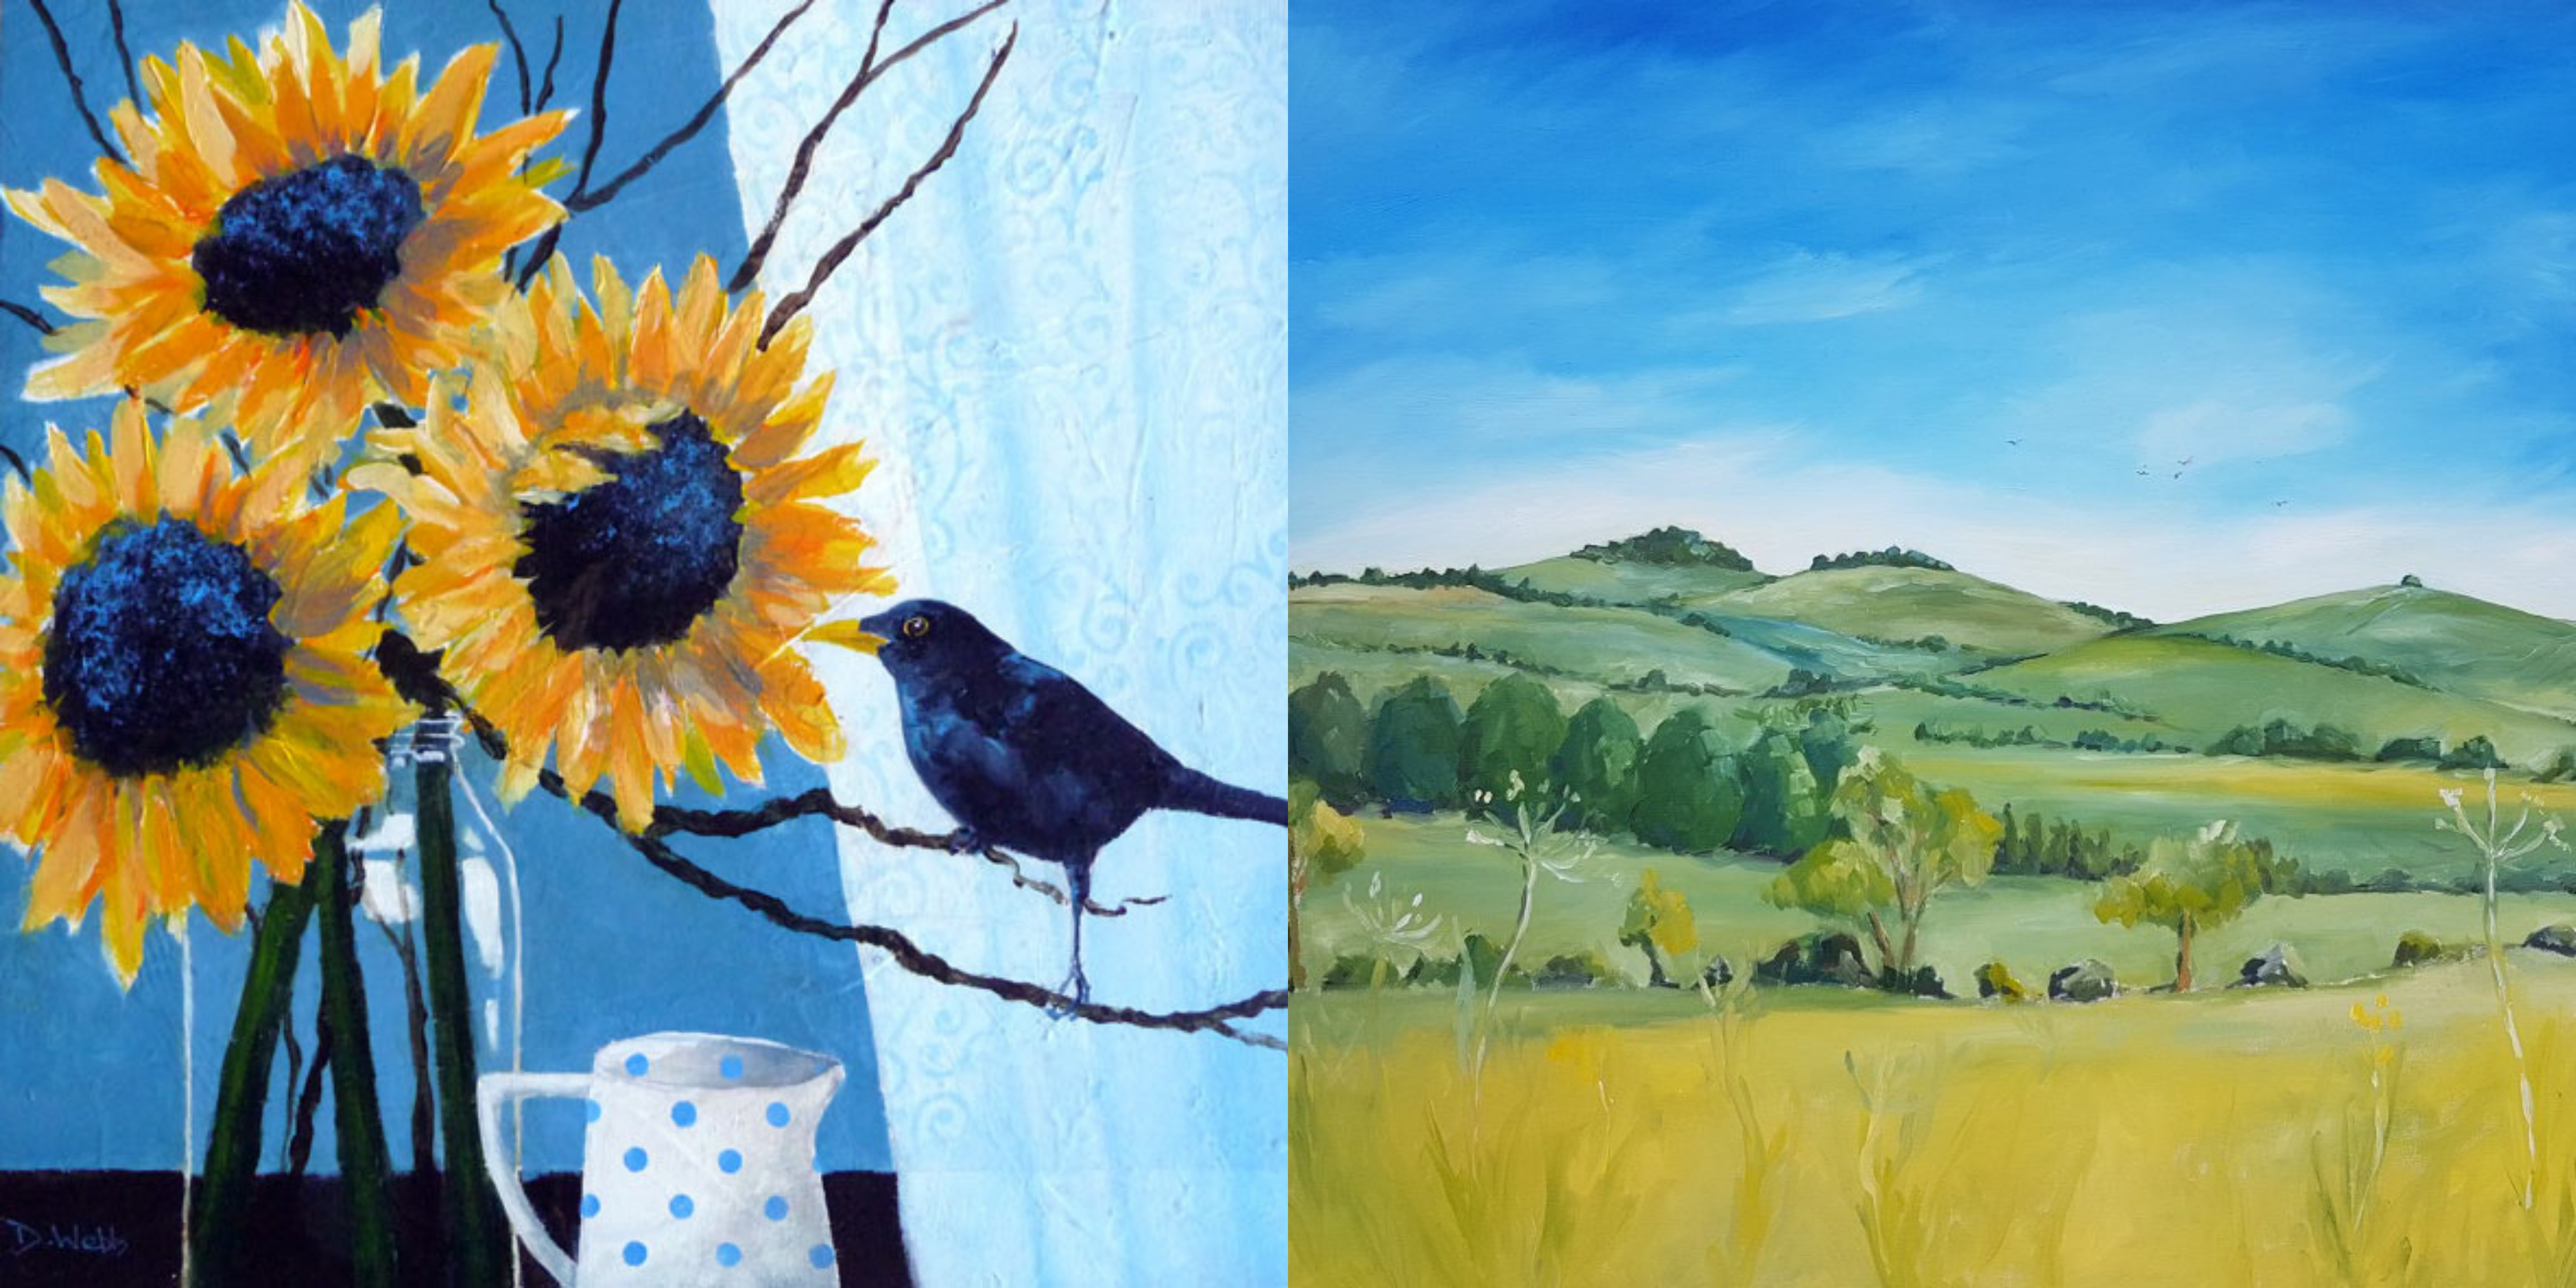 Two paintings are displayed. The left features bright yellow sunflowers beside a black bird and the right painting features beautiful Oxfordshire countryside.